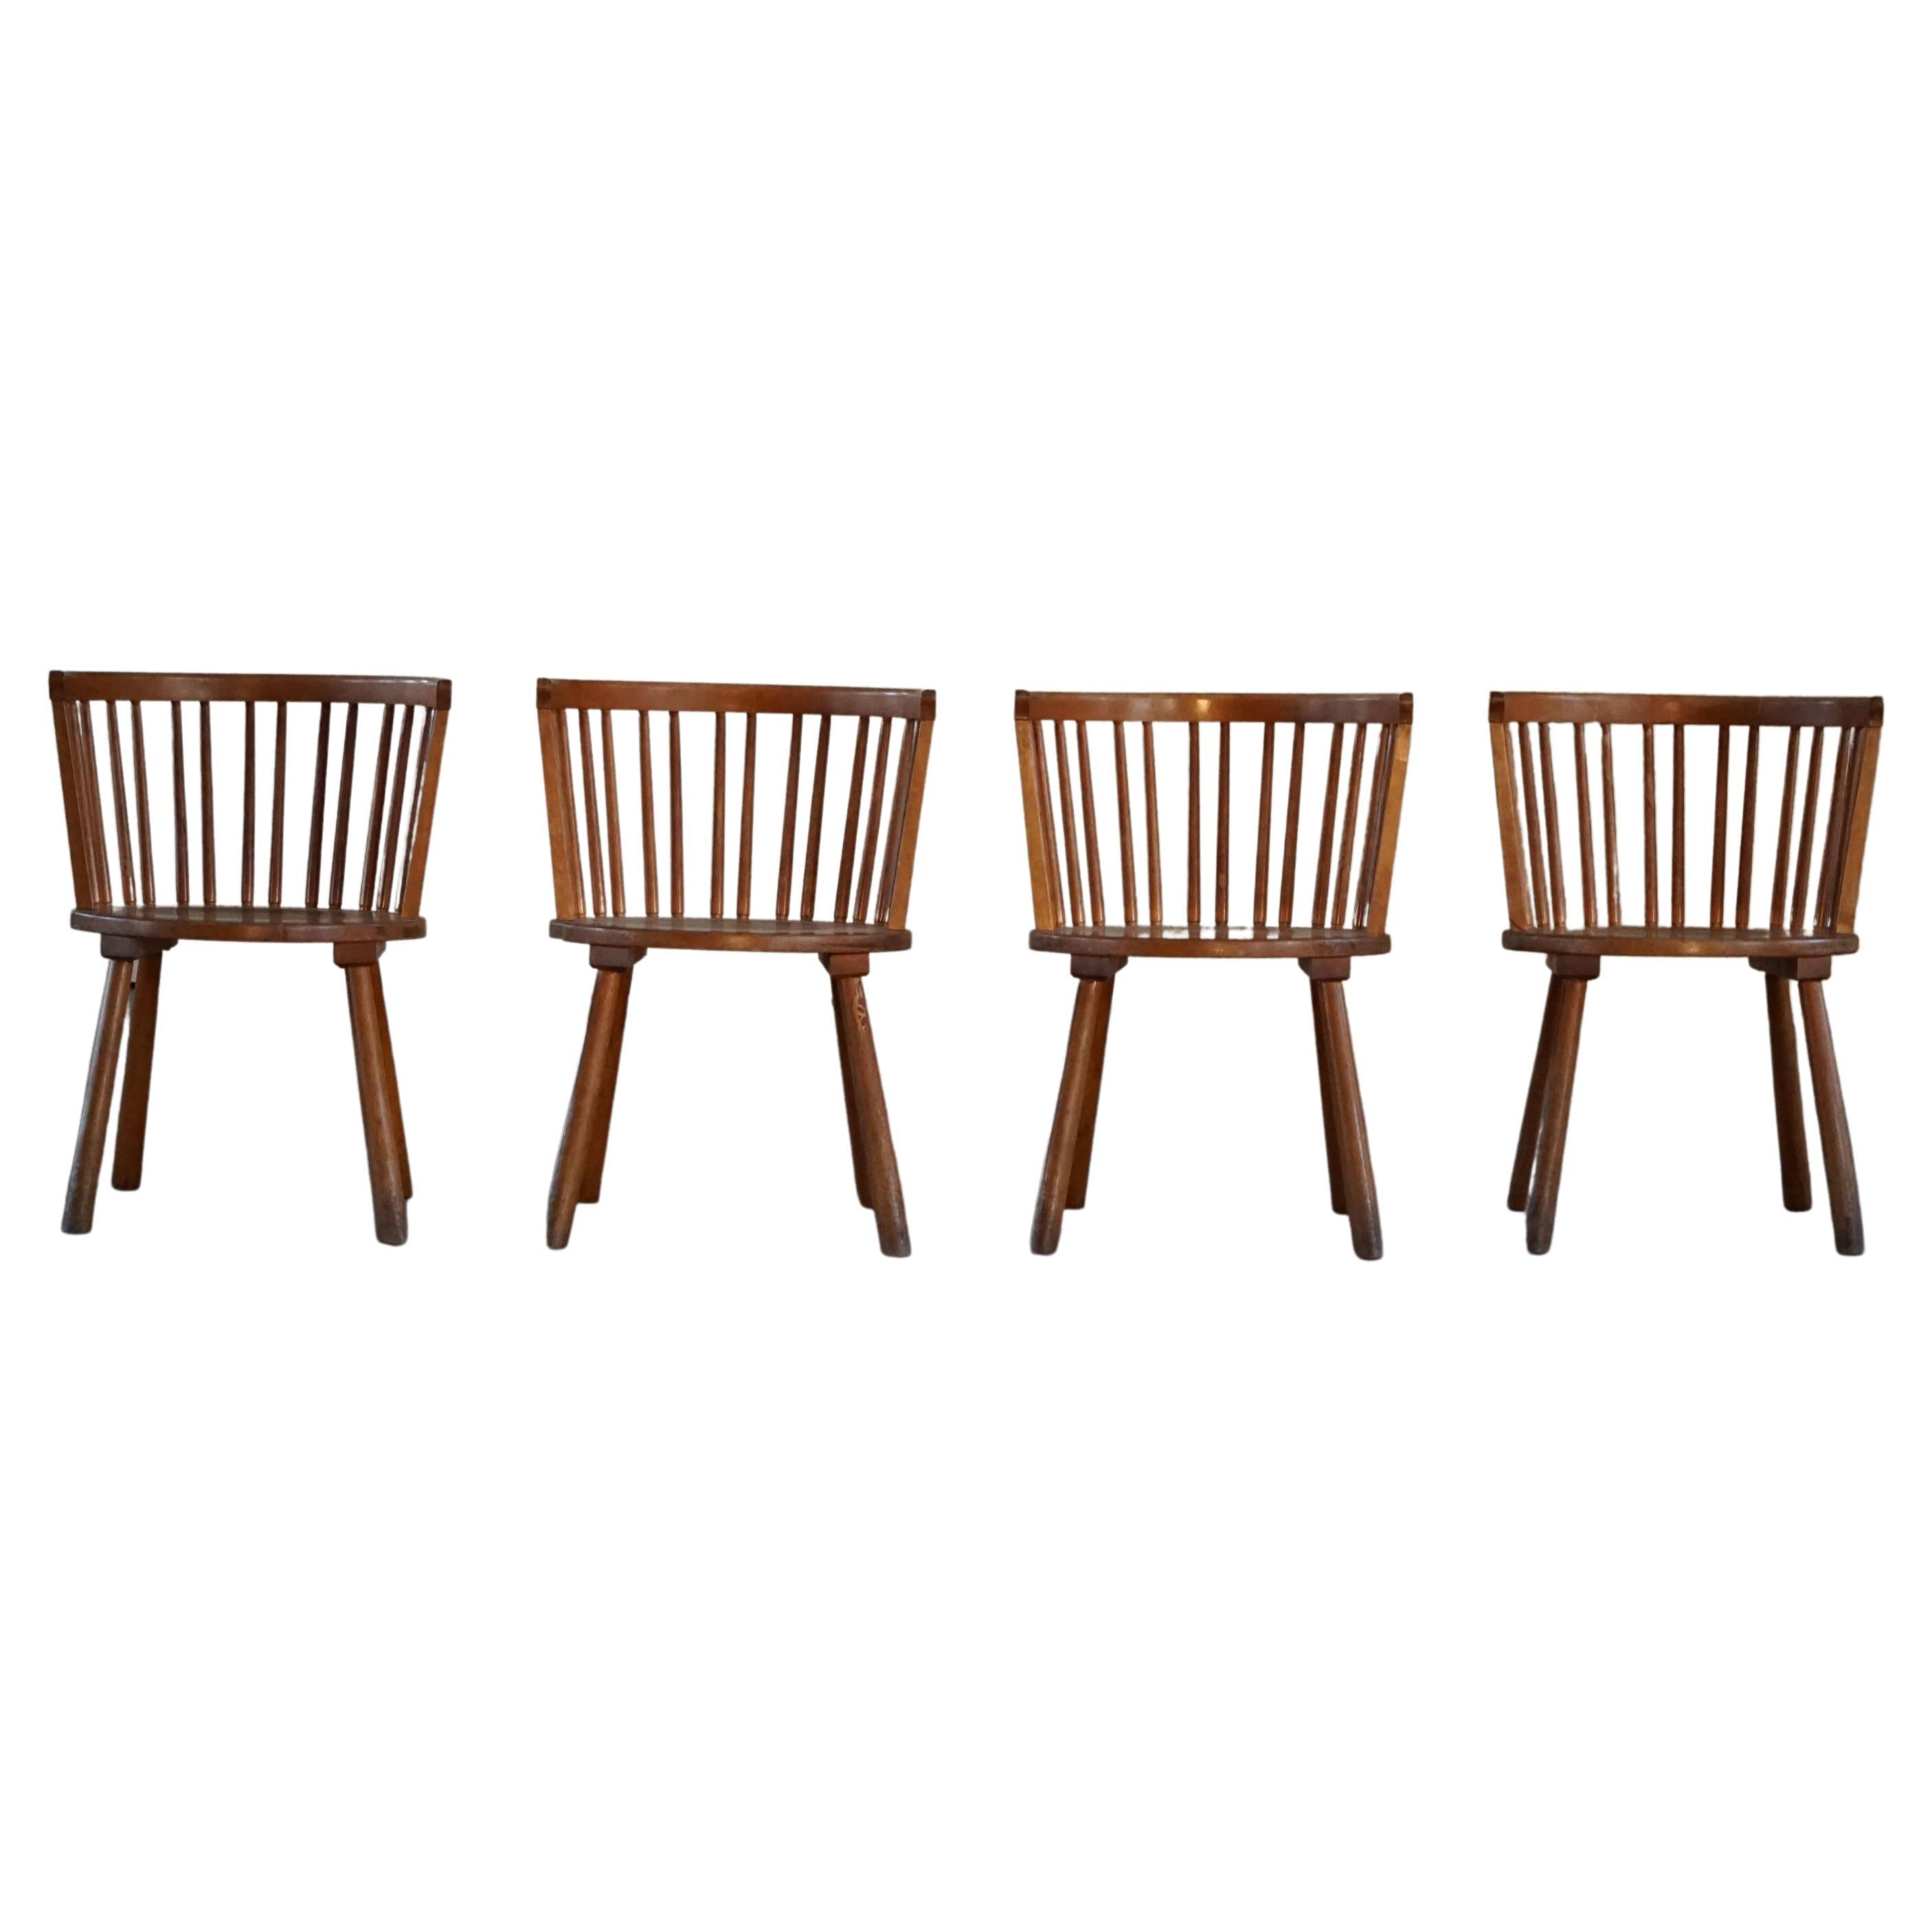 Swedish Modern Set of 4 Armchairs in the Style of Axel Einar Hjorth, 1930s